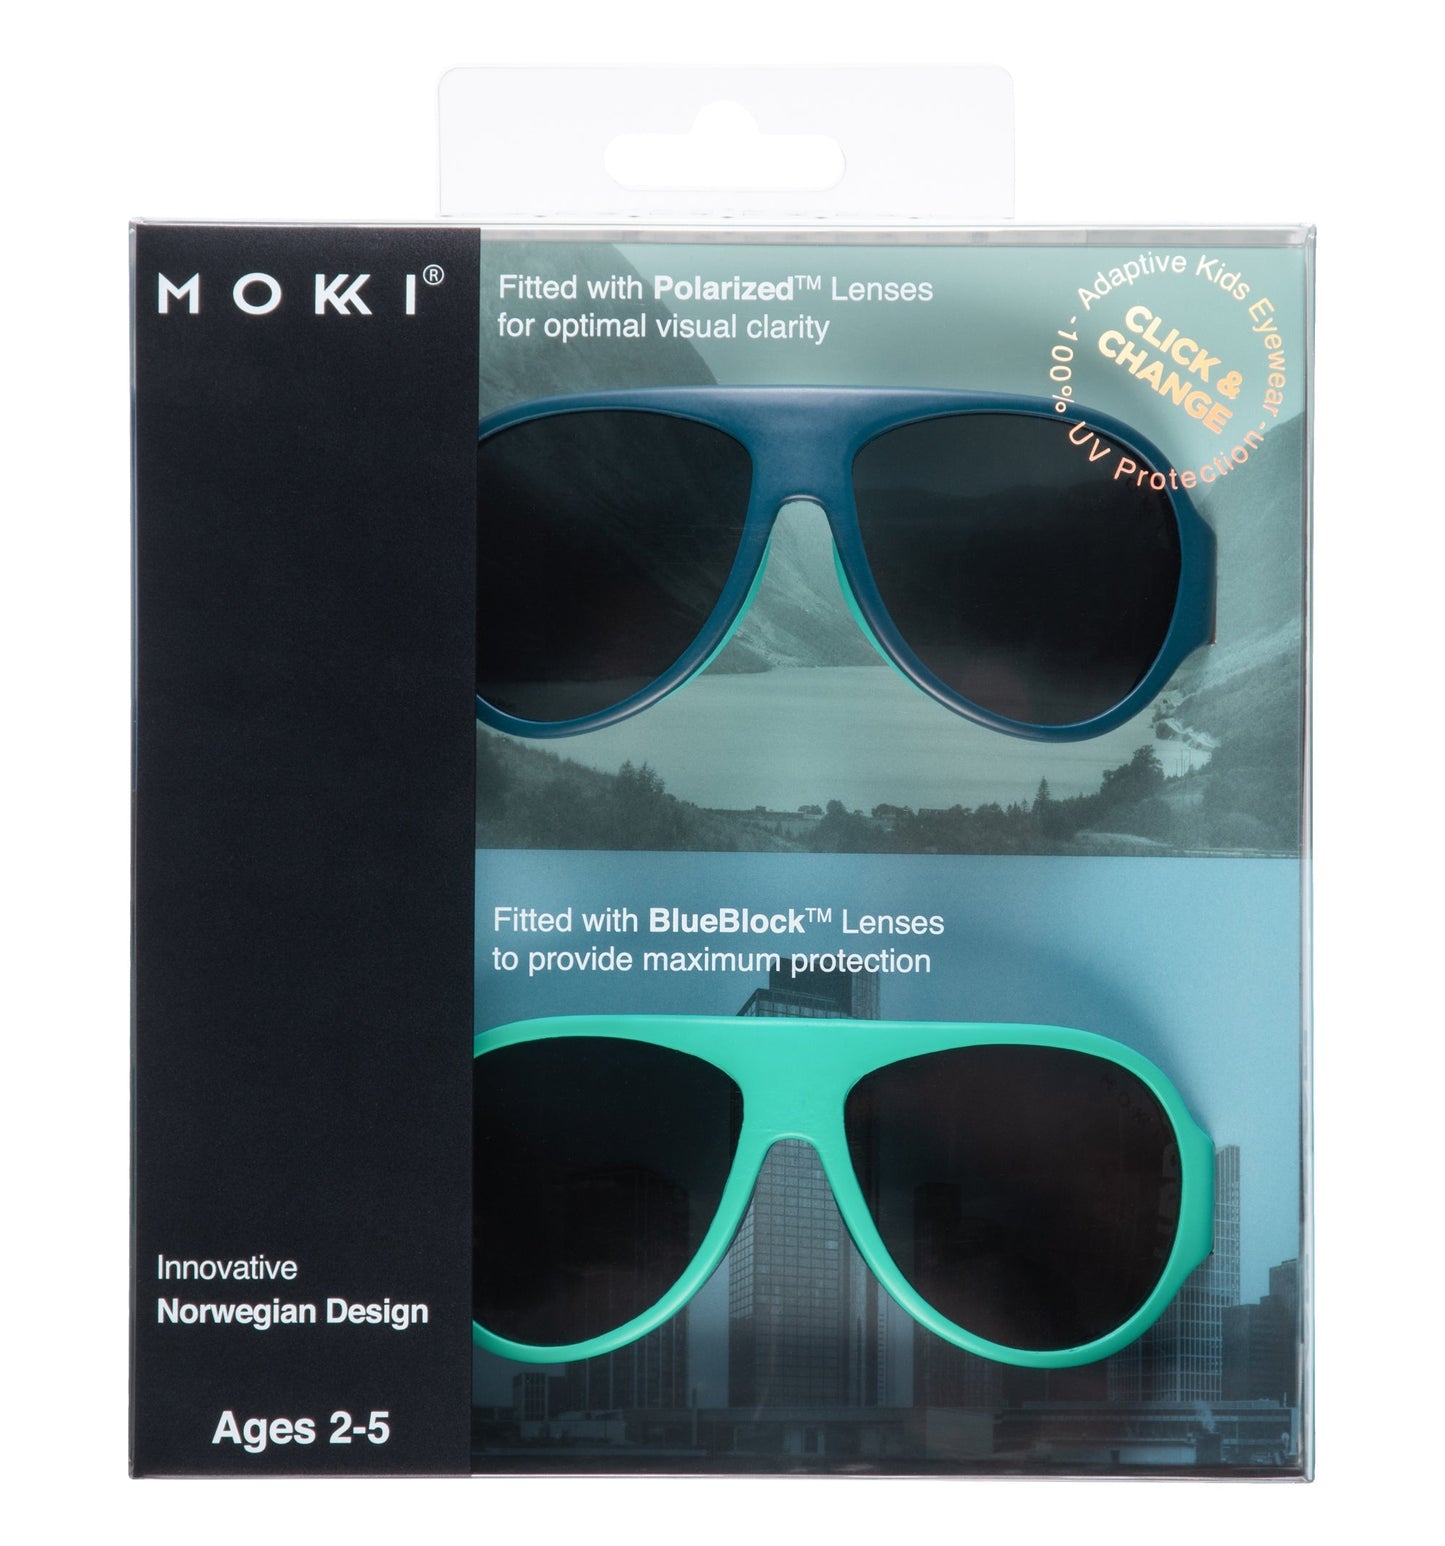 Mokki Click & Change-sunglasses for kids ages 2-5 in blue